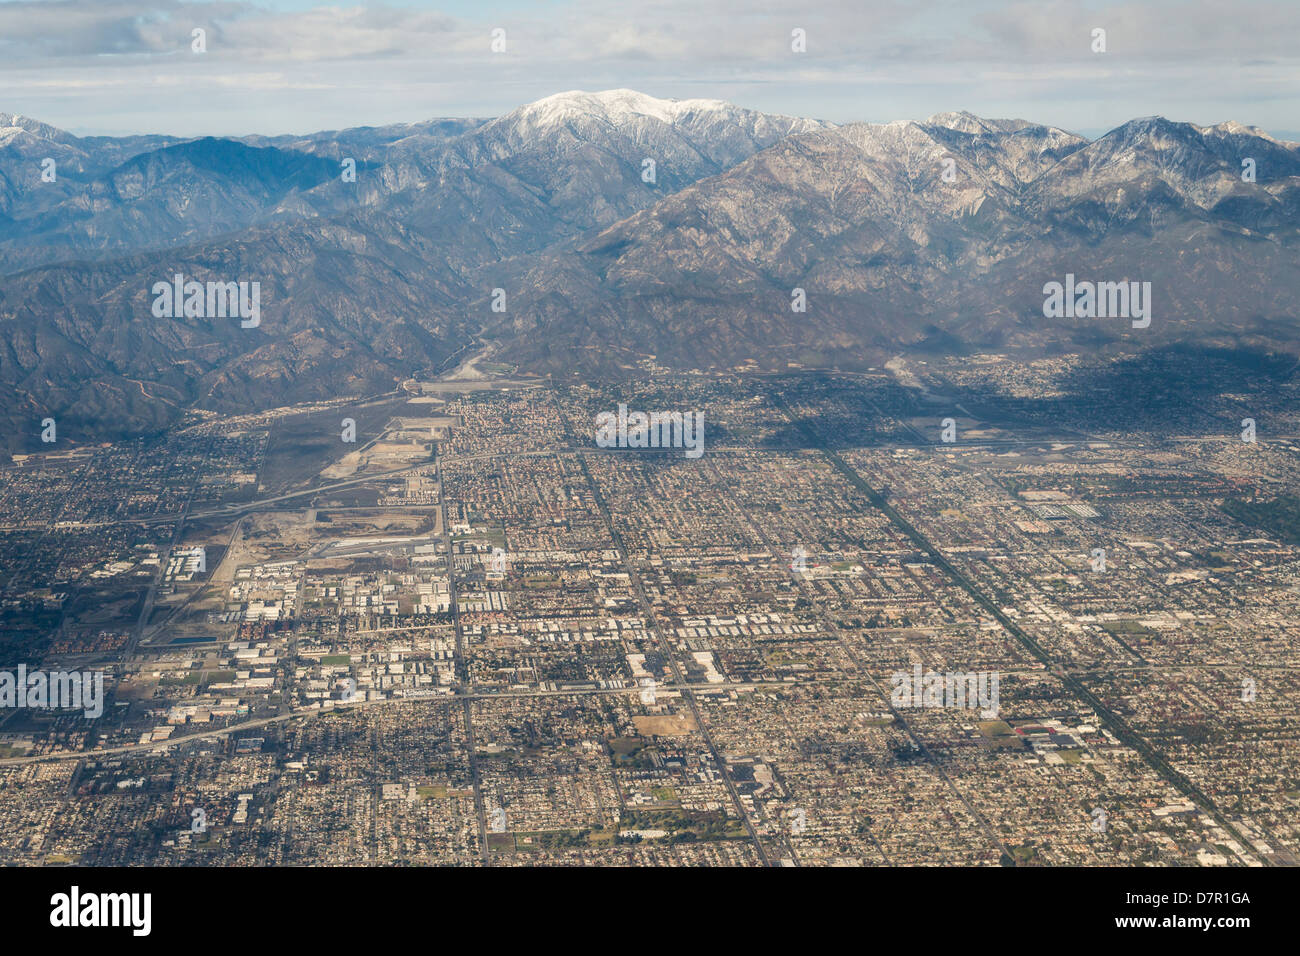 Inland Empire of Los Angeles, picture from the air with the San Gabriel Mountains in the distance. Stock Photo